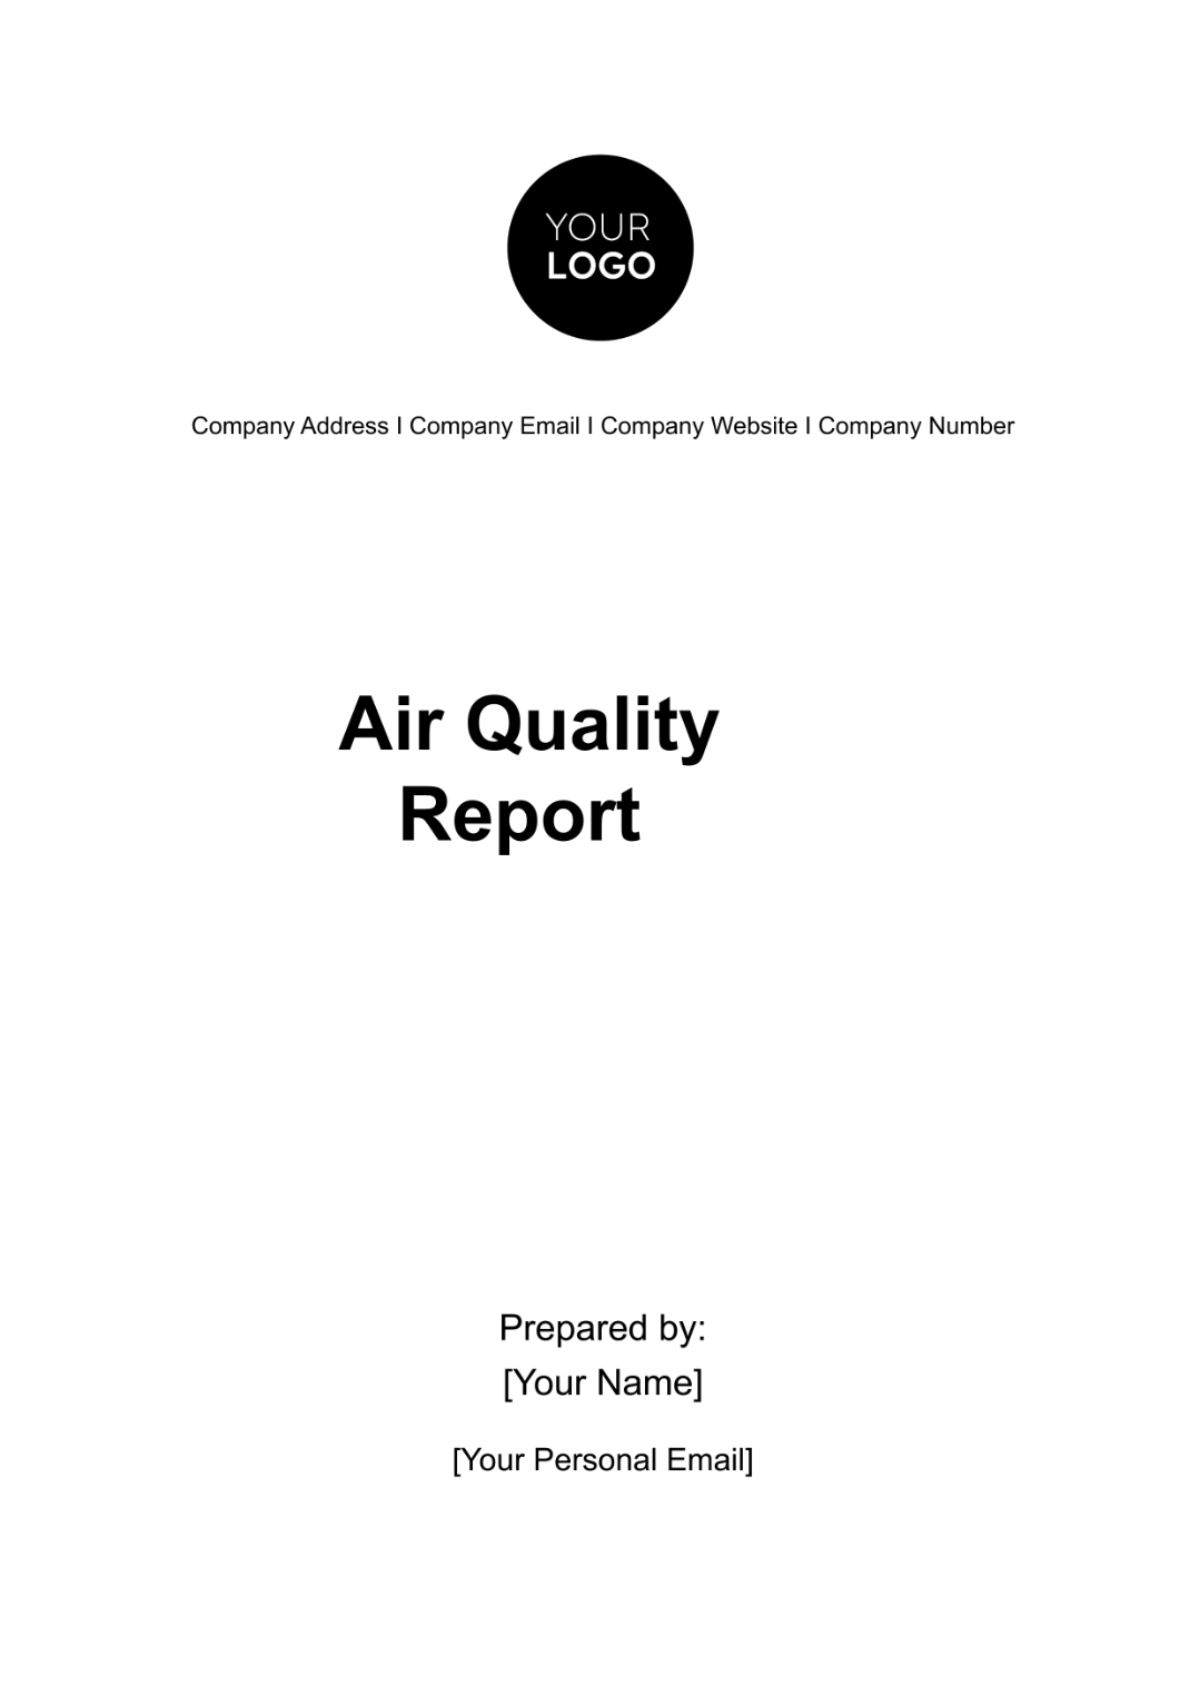 Air Quality Report HR Template